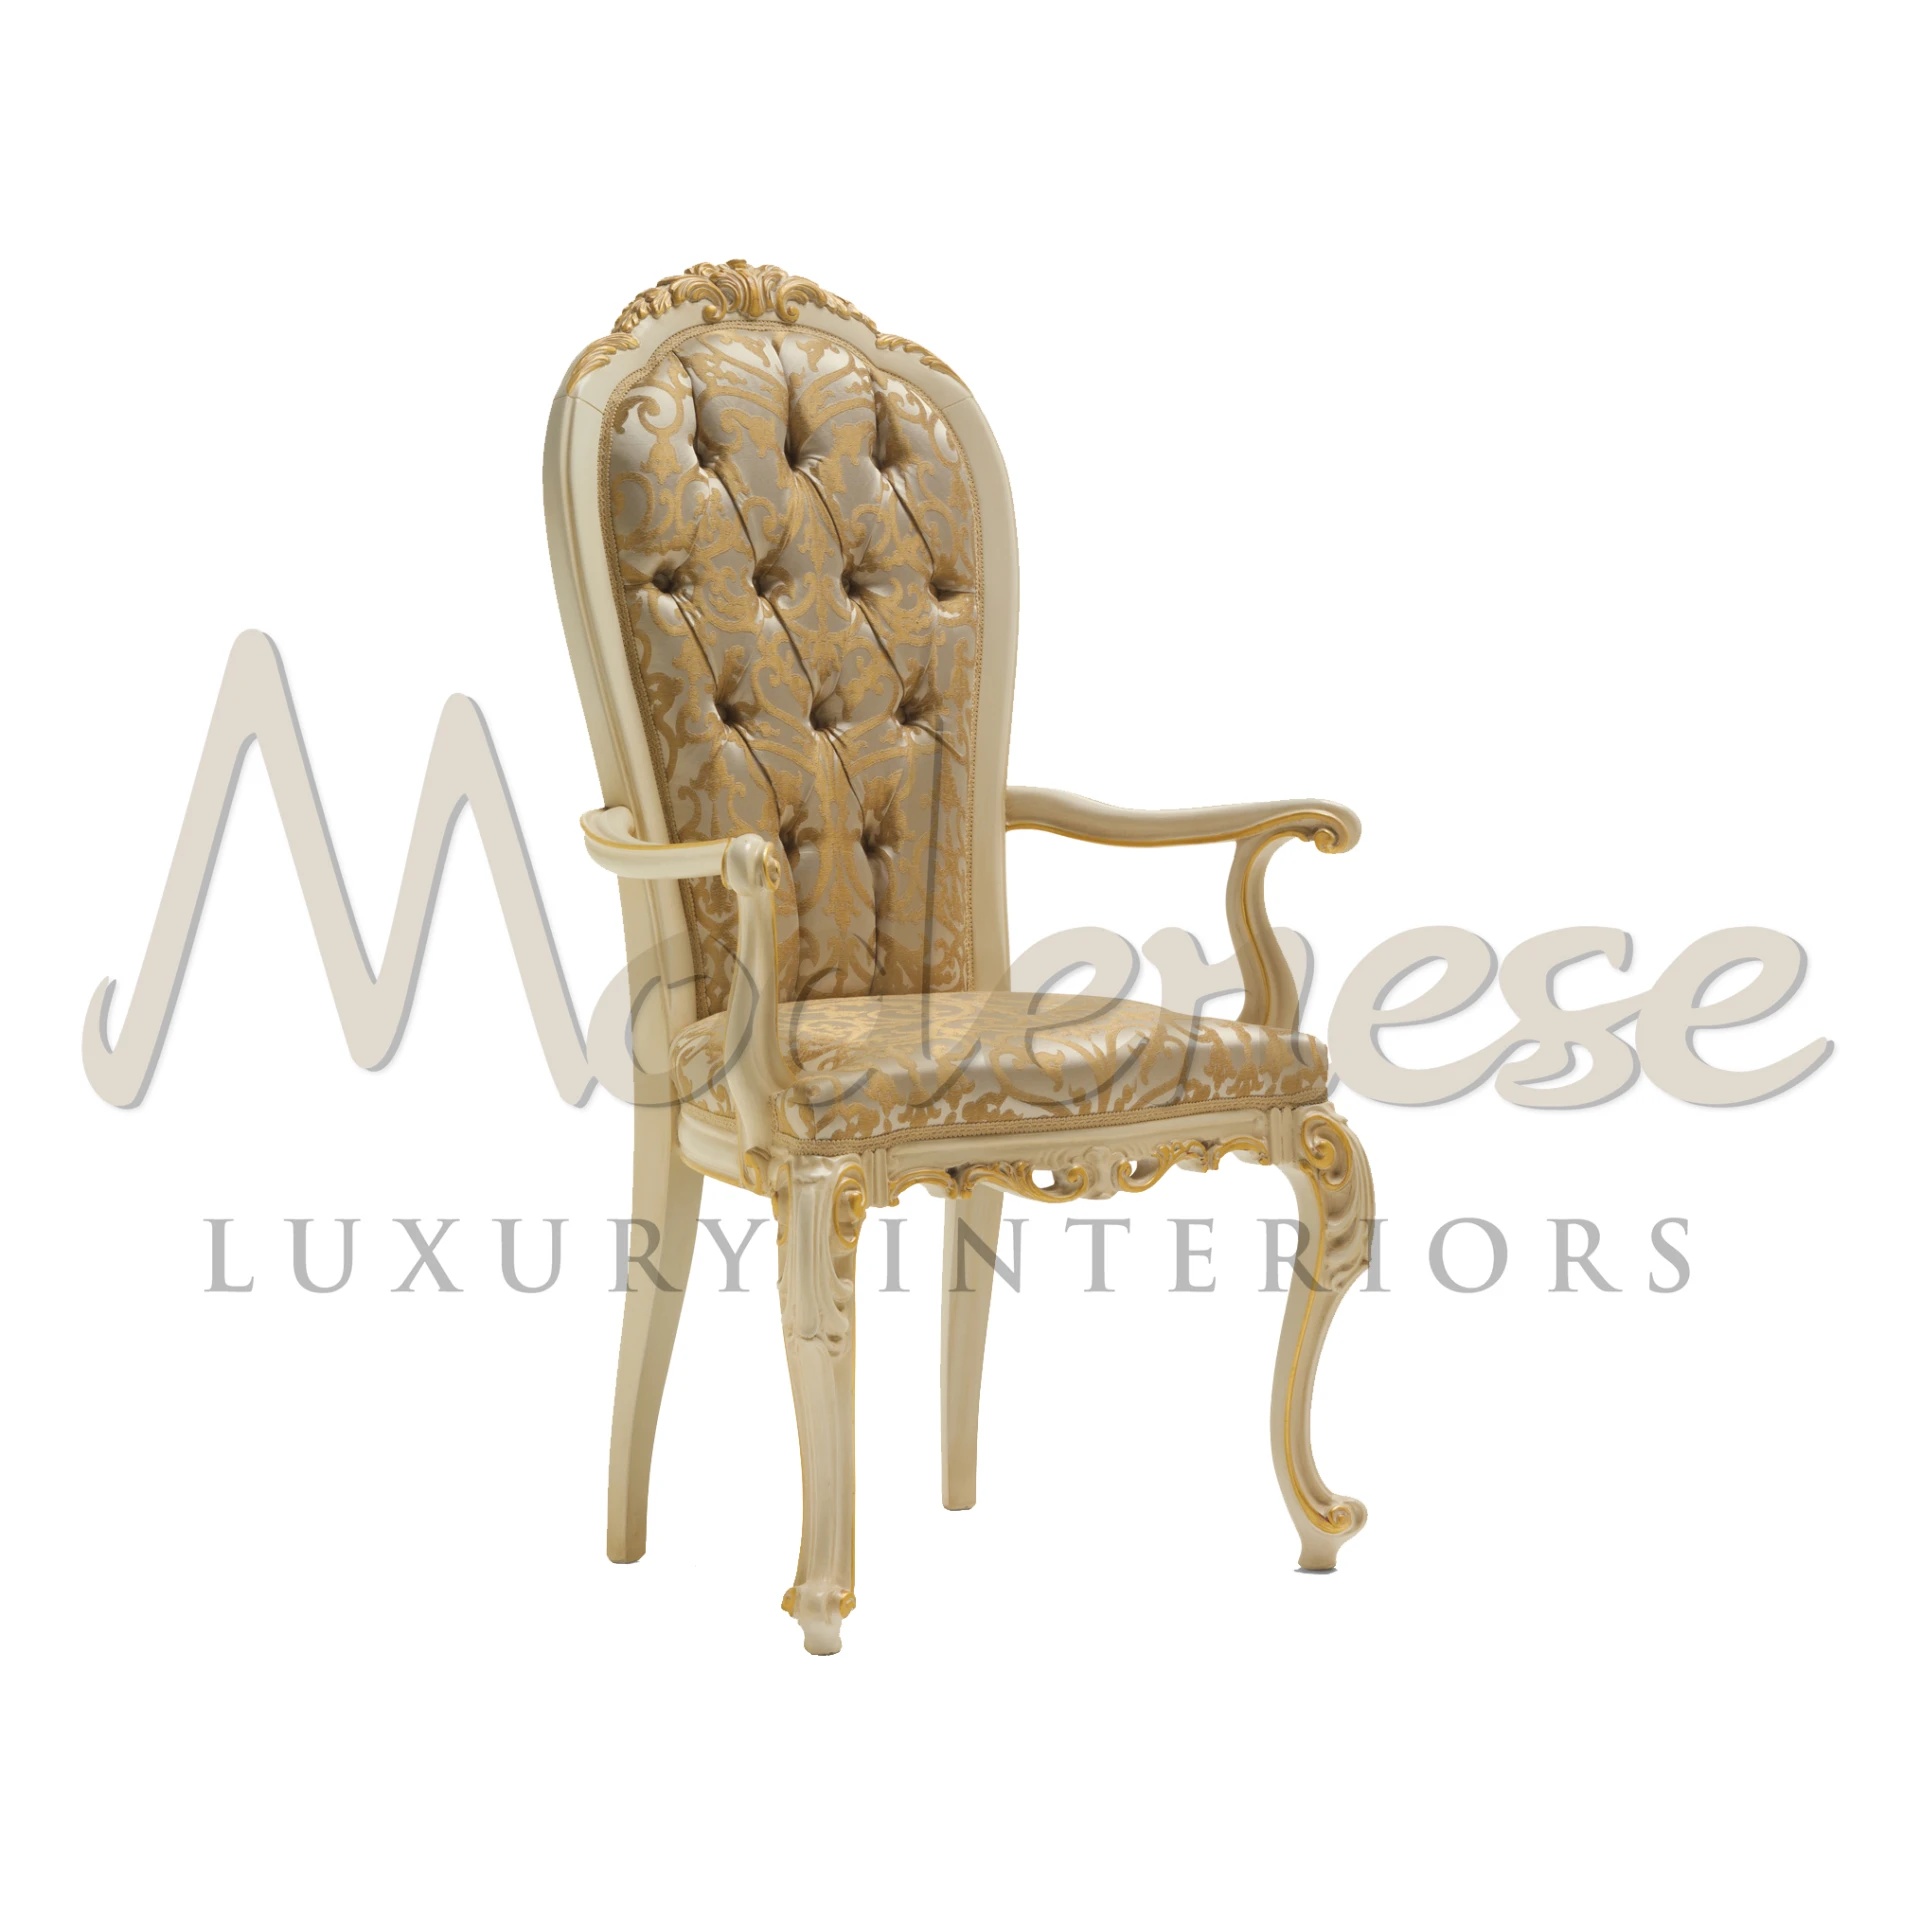 Luxurious Italian Upholstered chair with armrests with ivory finishing and golden leaf pattern.